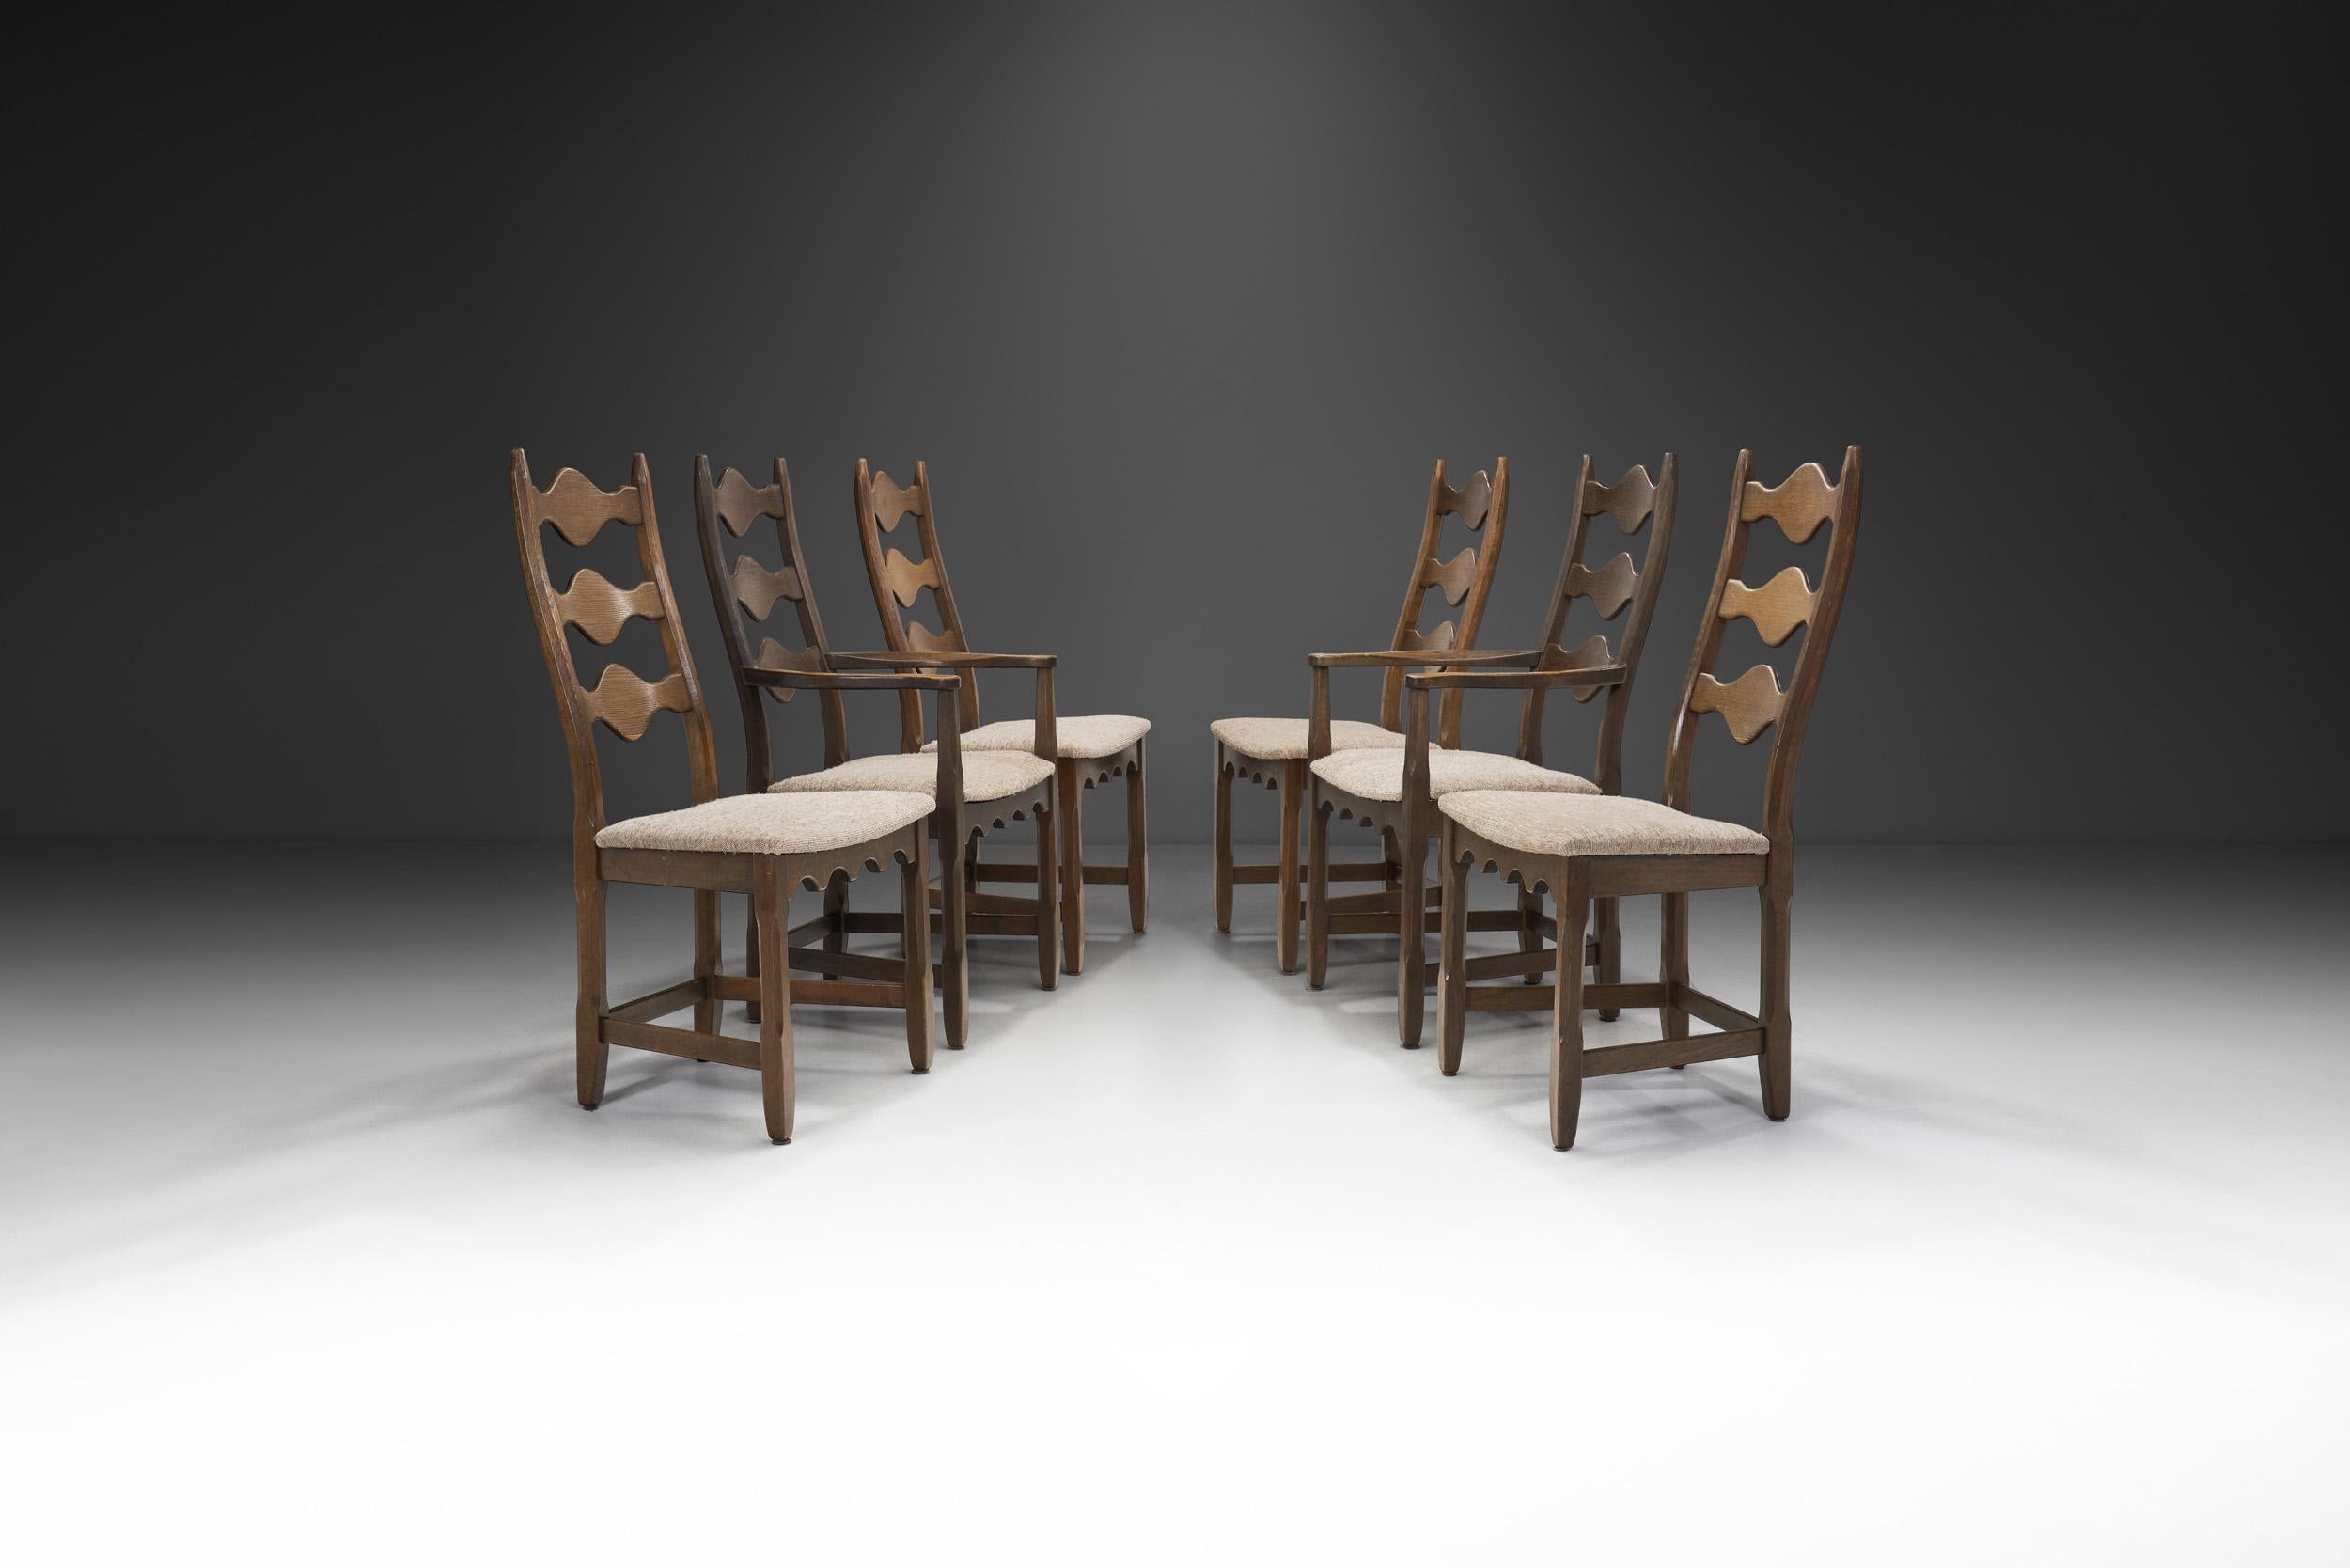 This impressive mid-century set of dining chairs is representative of the fundamental axioms of Scandinavian design that revolve around quality and function. Kjaernulf’s work reveals quality craftsmanship throughout, featuring clean lines with